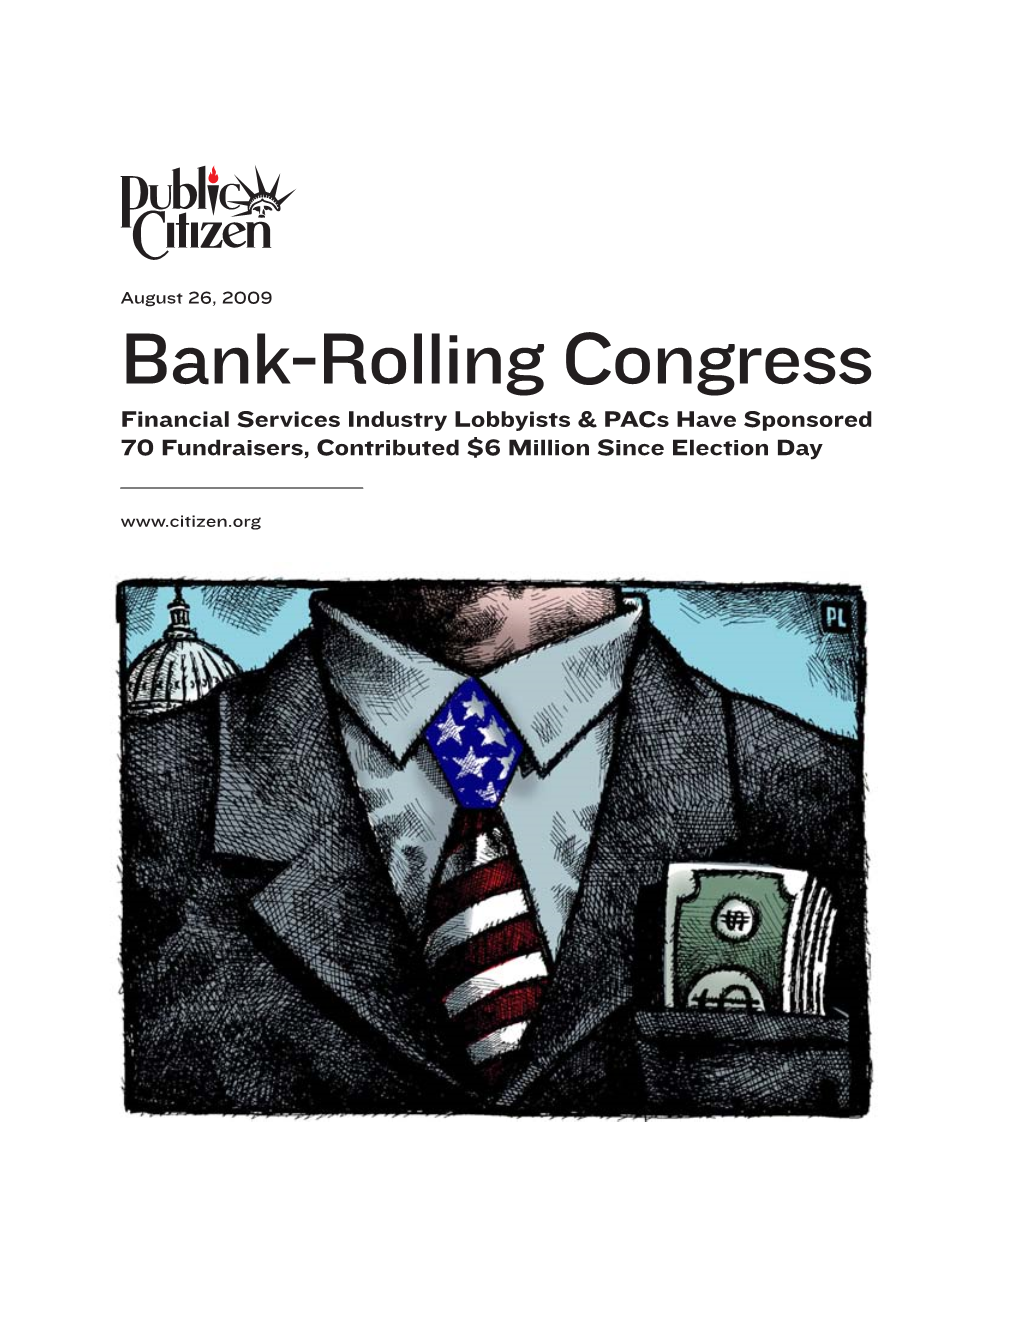 Bank-Rolling Congress Financial Services Industry Lobbyists & Pacs Have Sponsored 70 Fundraisers, Contributed $6 Million Since Election Day